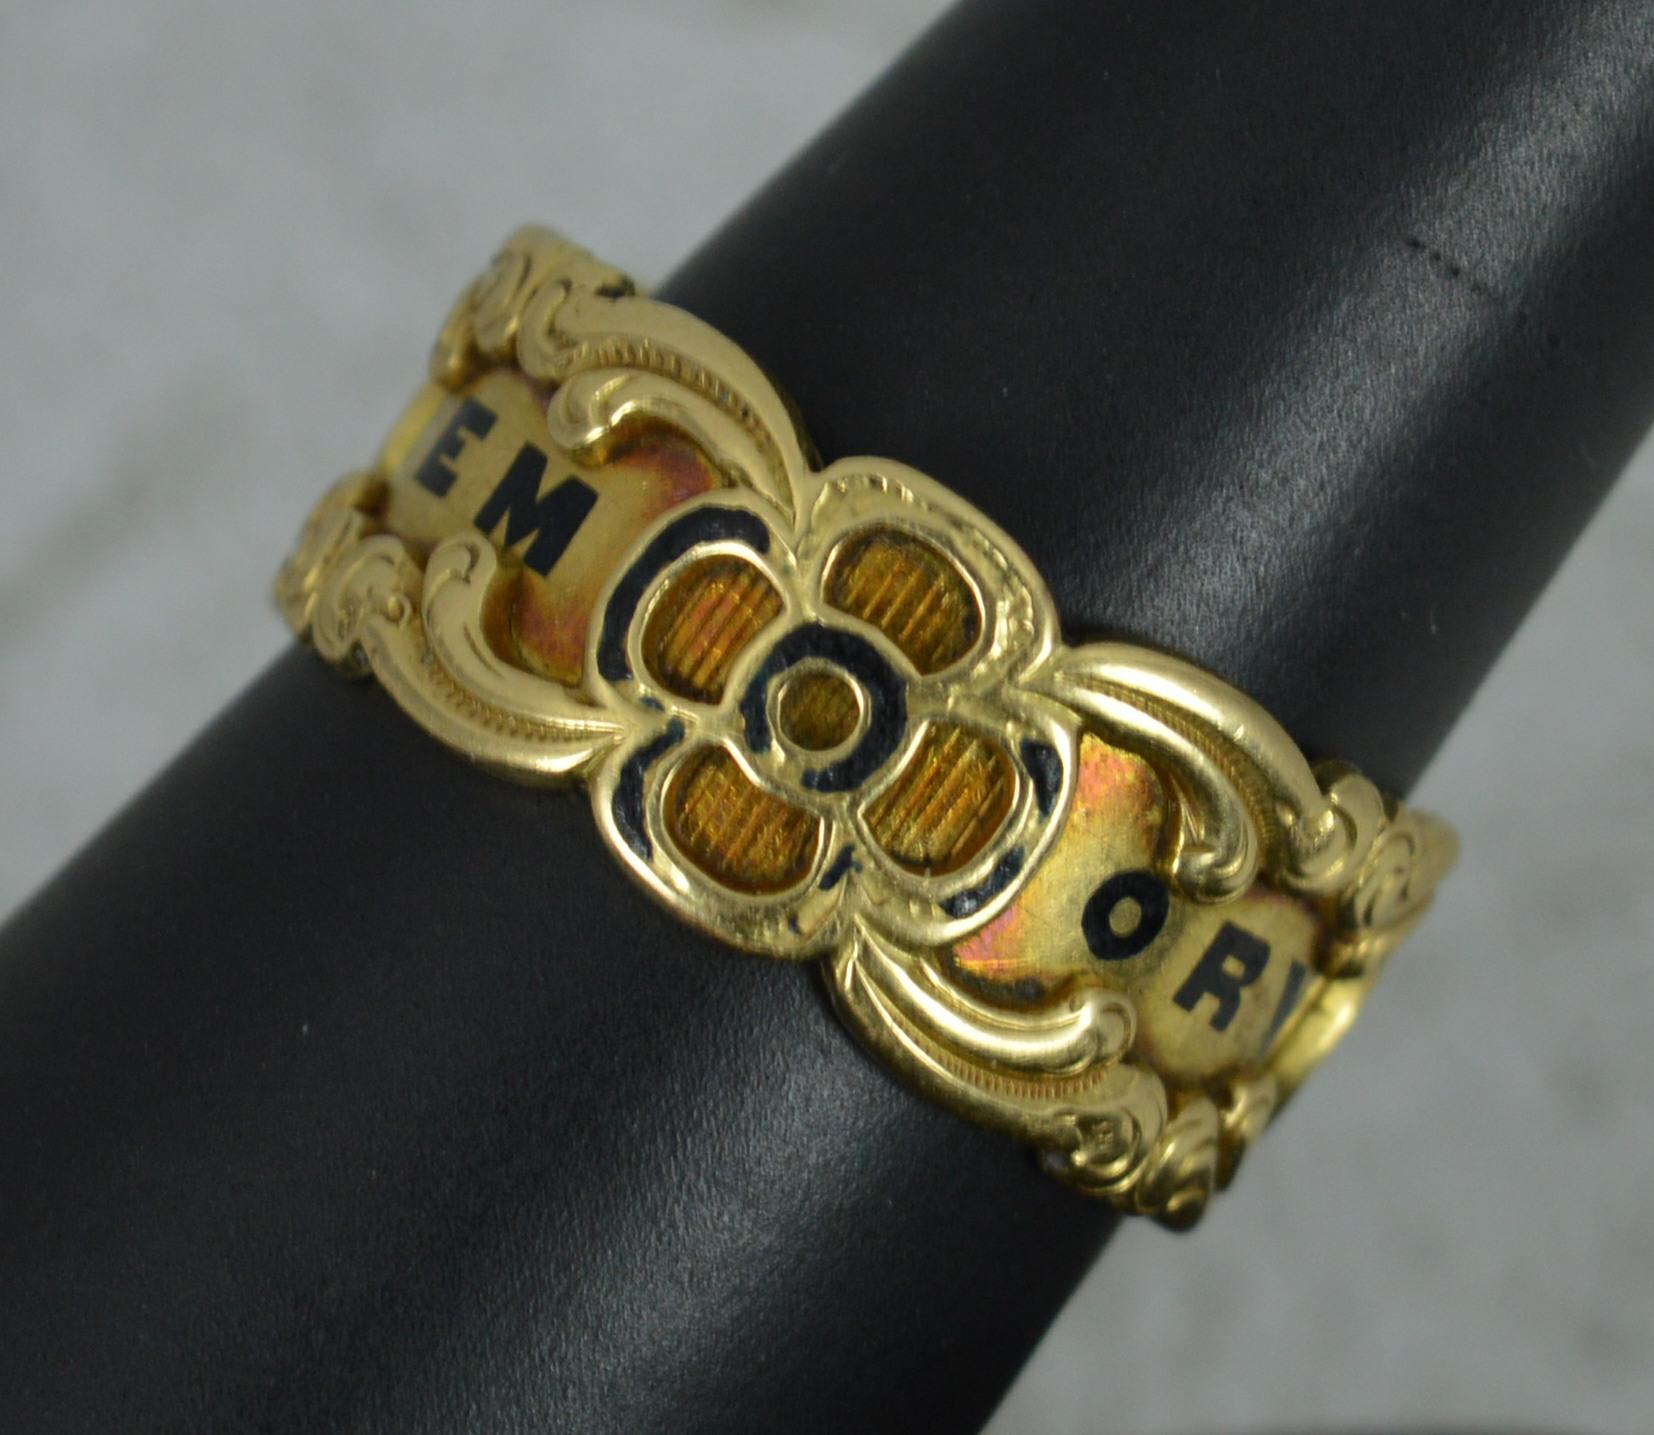 1842 Victorian 18 Carat Gold Enamel In Memory of Mourning Band Ring For Sale 8